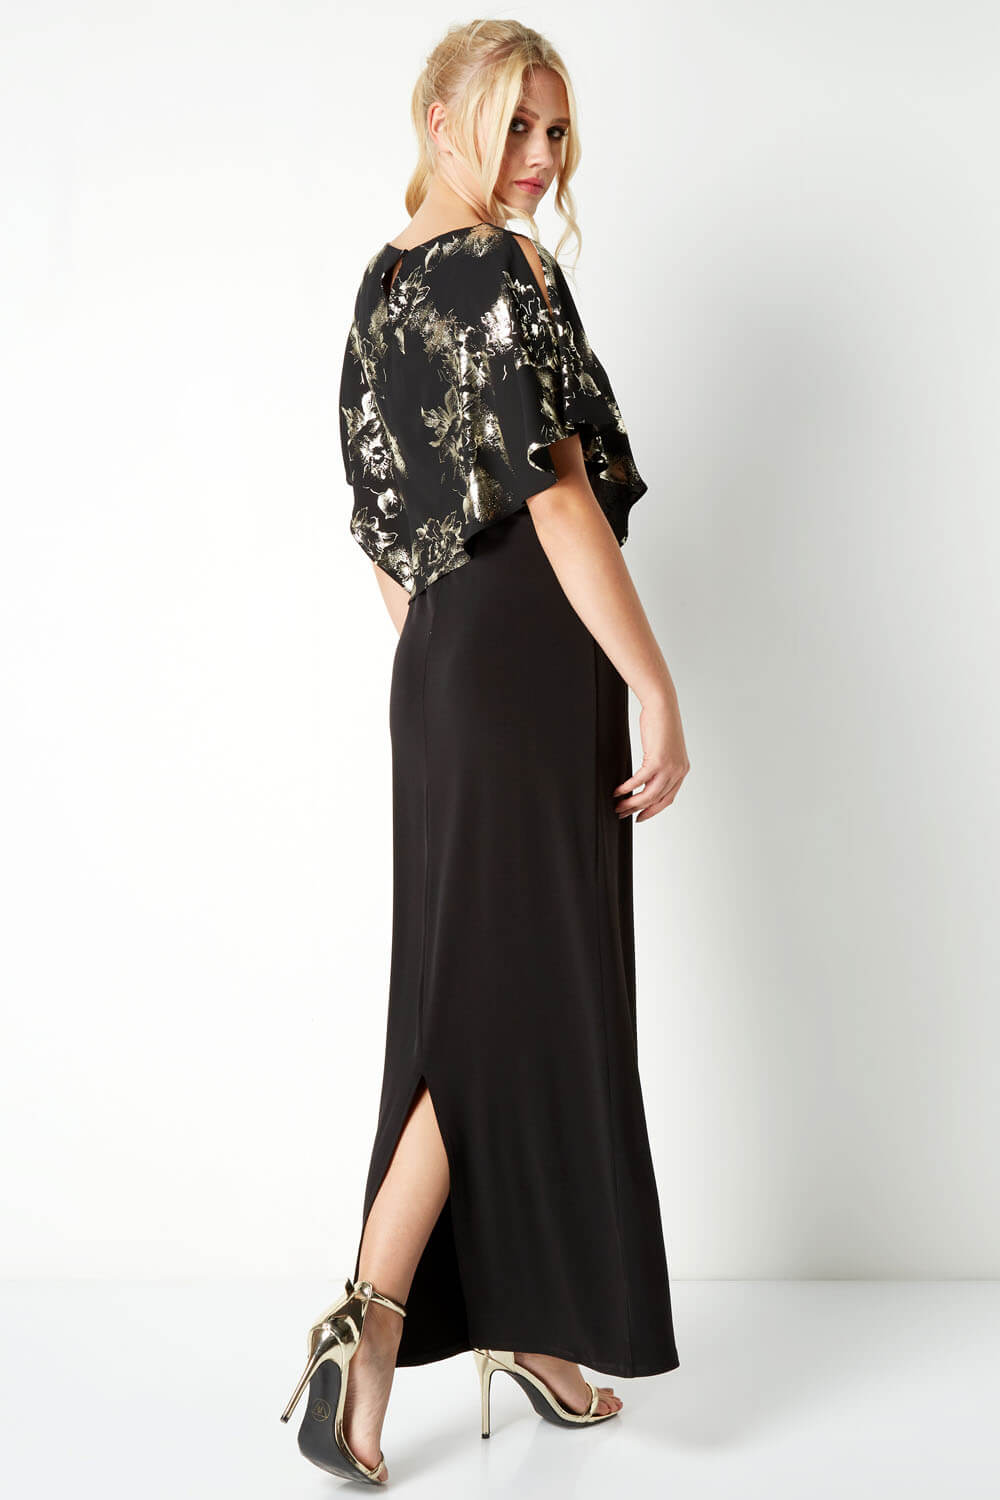 Gold Floral Overlay Maxi Dress, Image 3 of 5